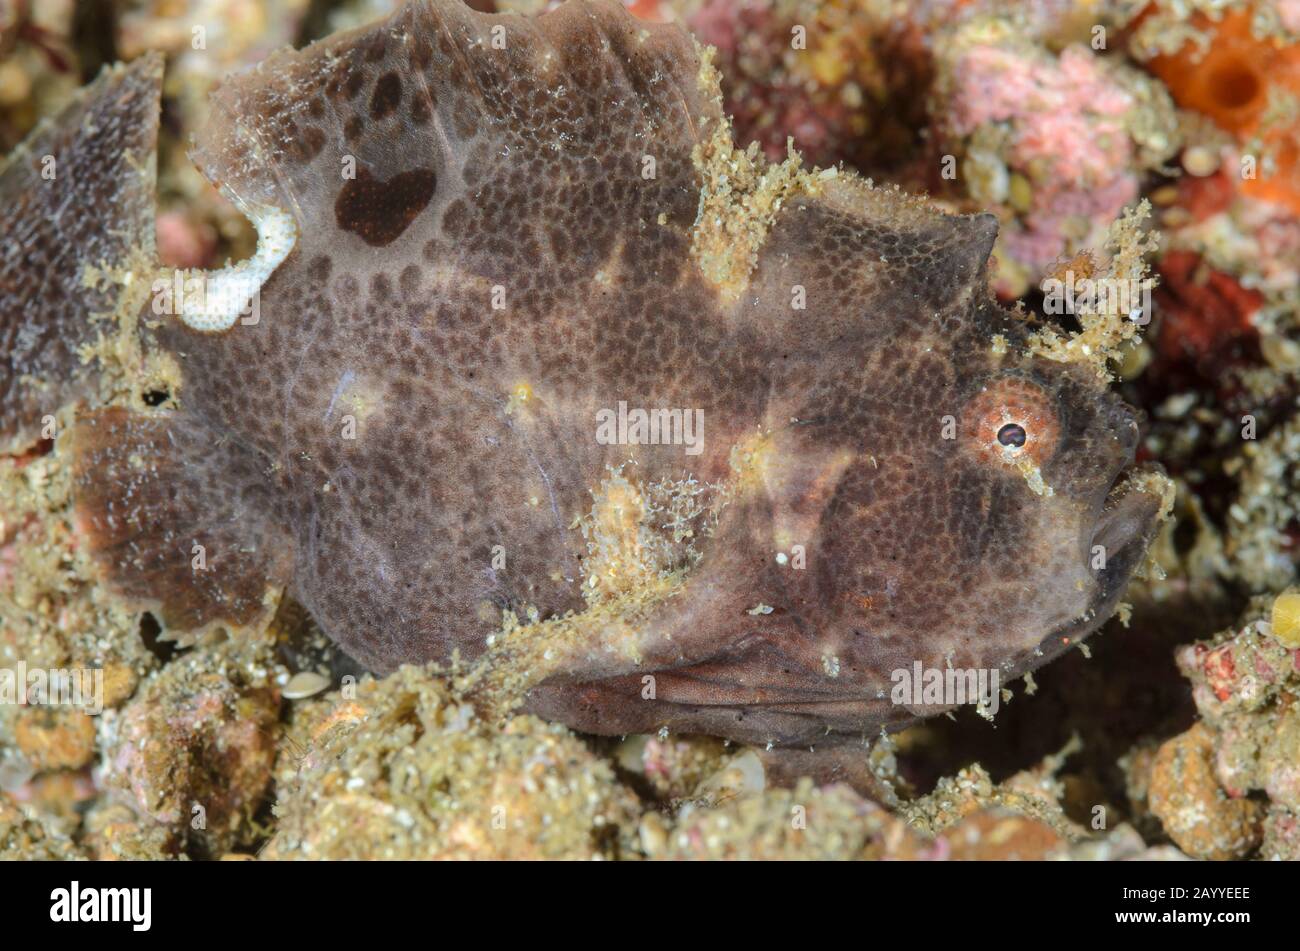 Ocellated or Lembeh frogfish, Nudiantennarius subteres, Lembeh Strait, North Sulawesi, Indonesia, Pacific Stock Photo